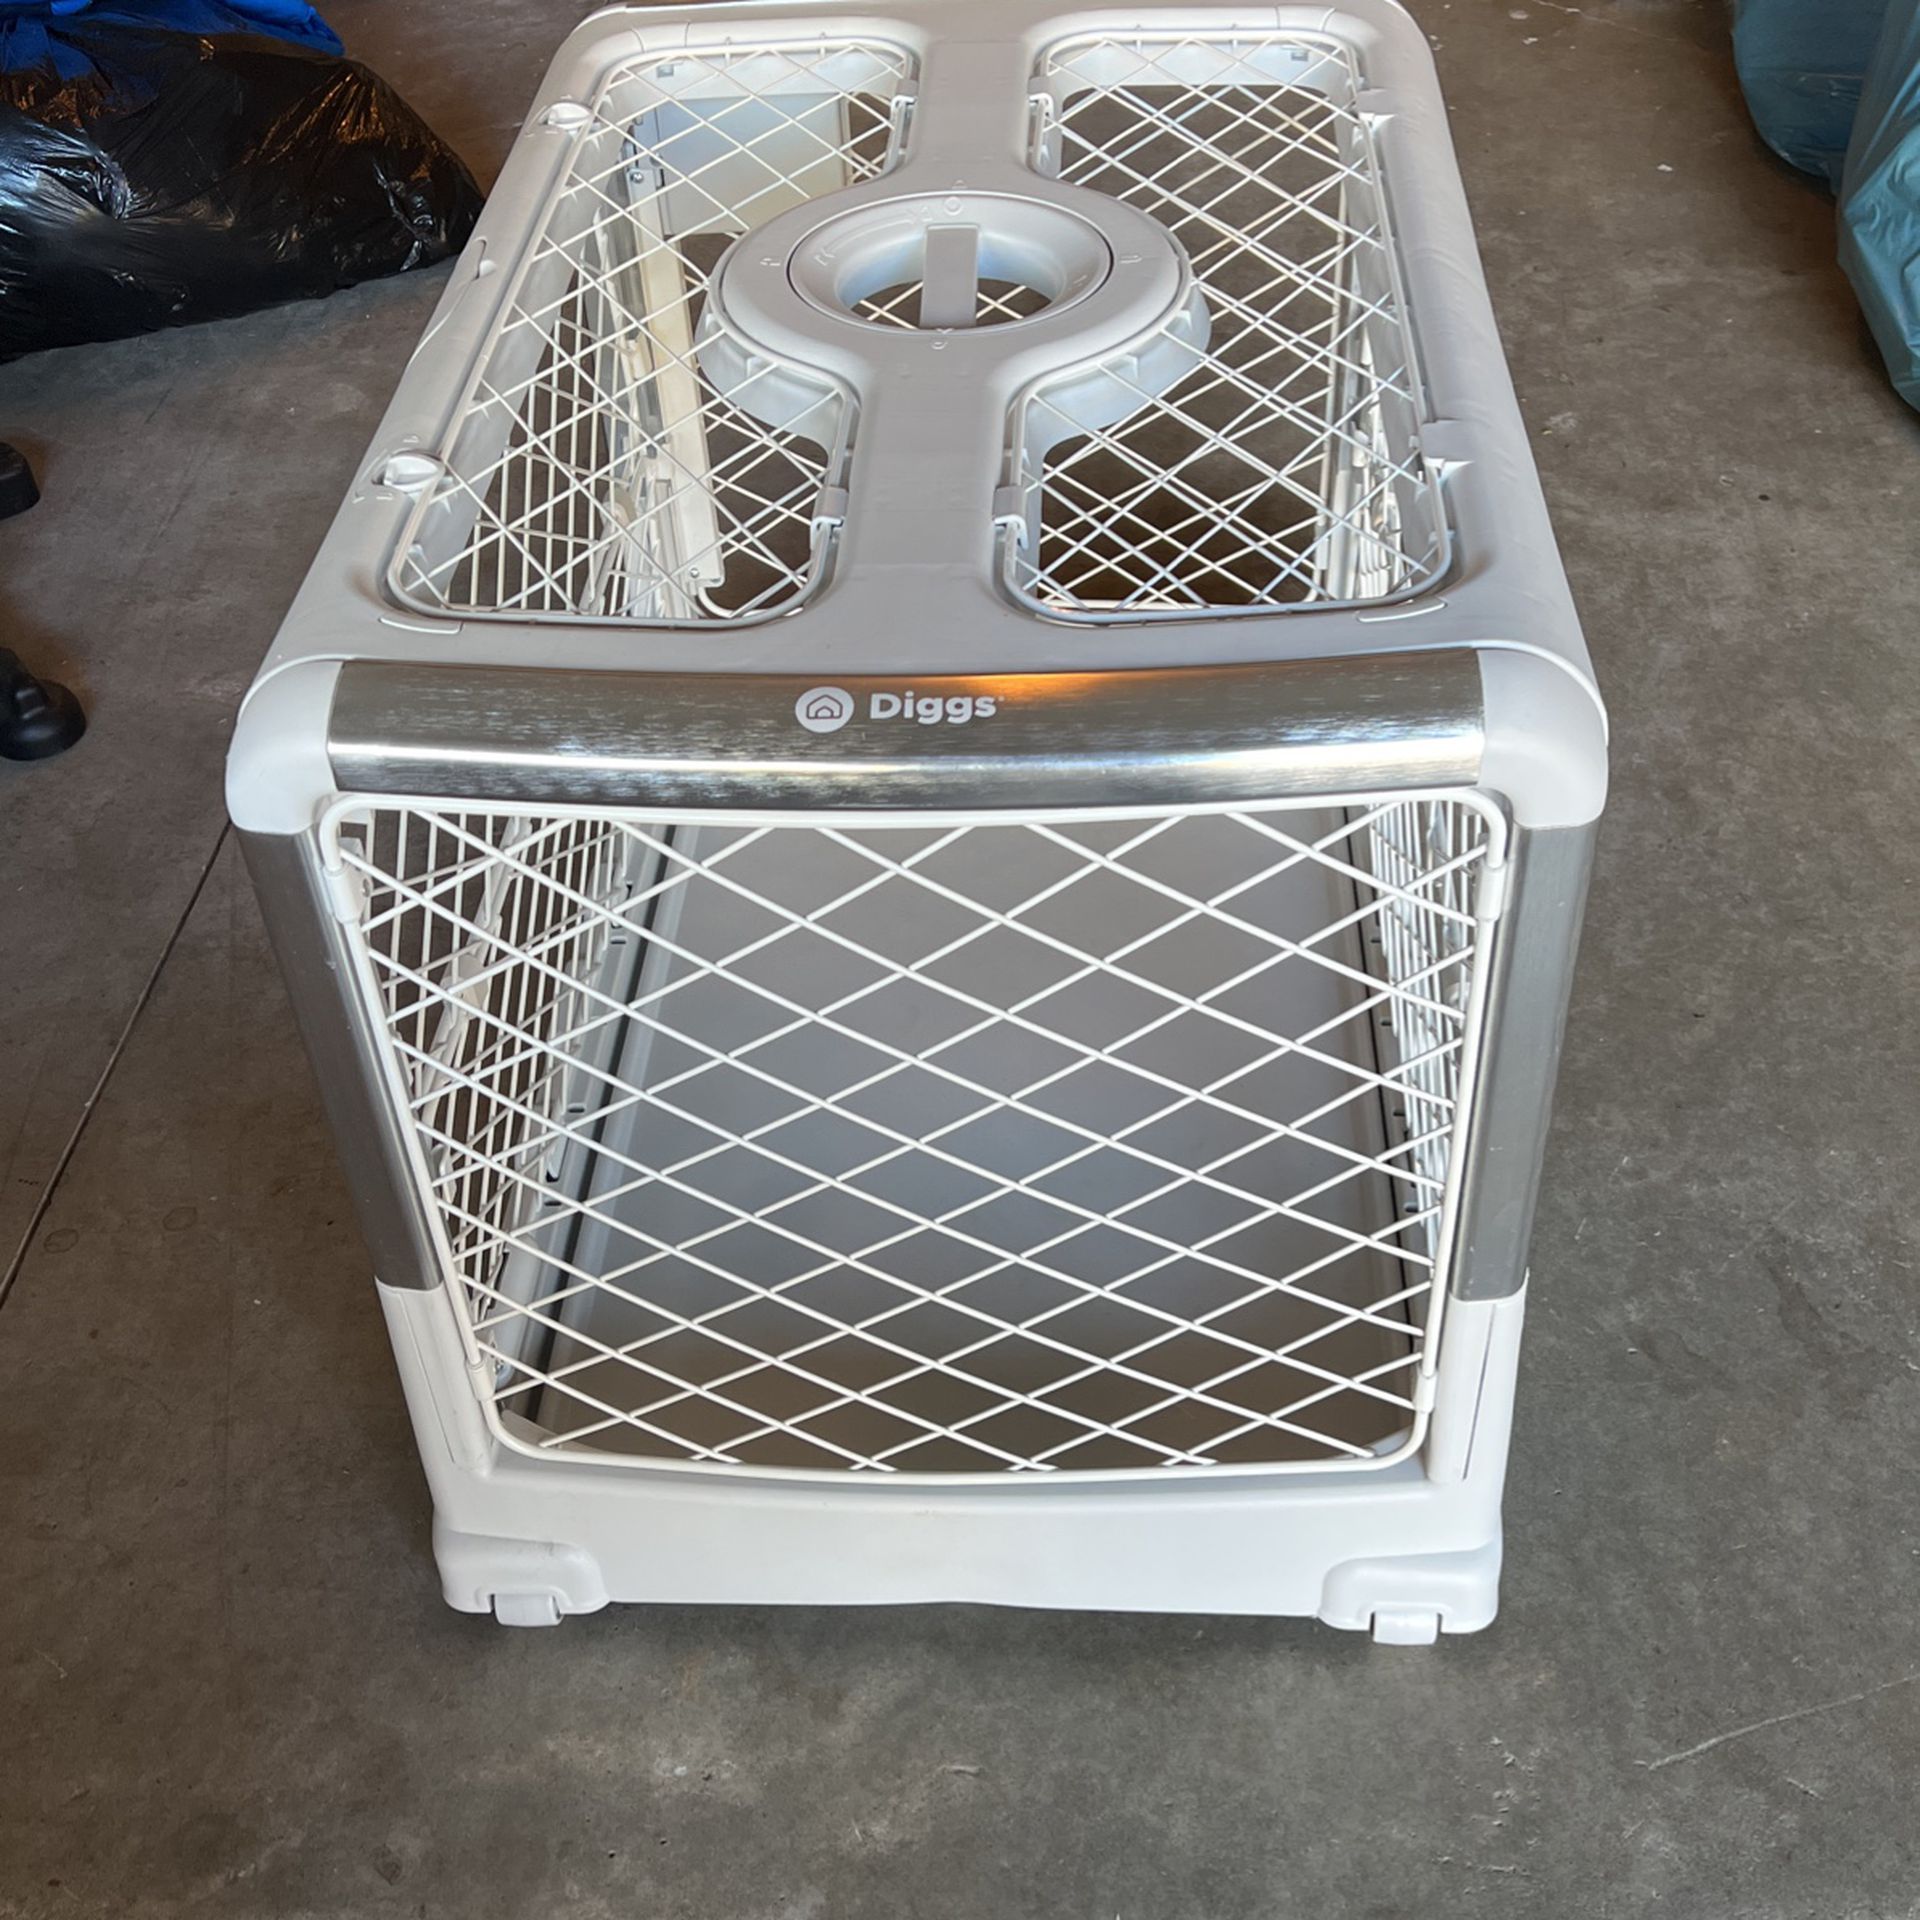 Collapsible Diggs Dog Crate 